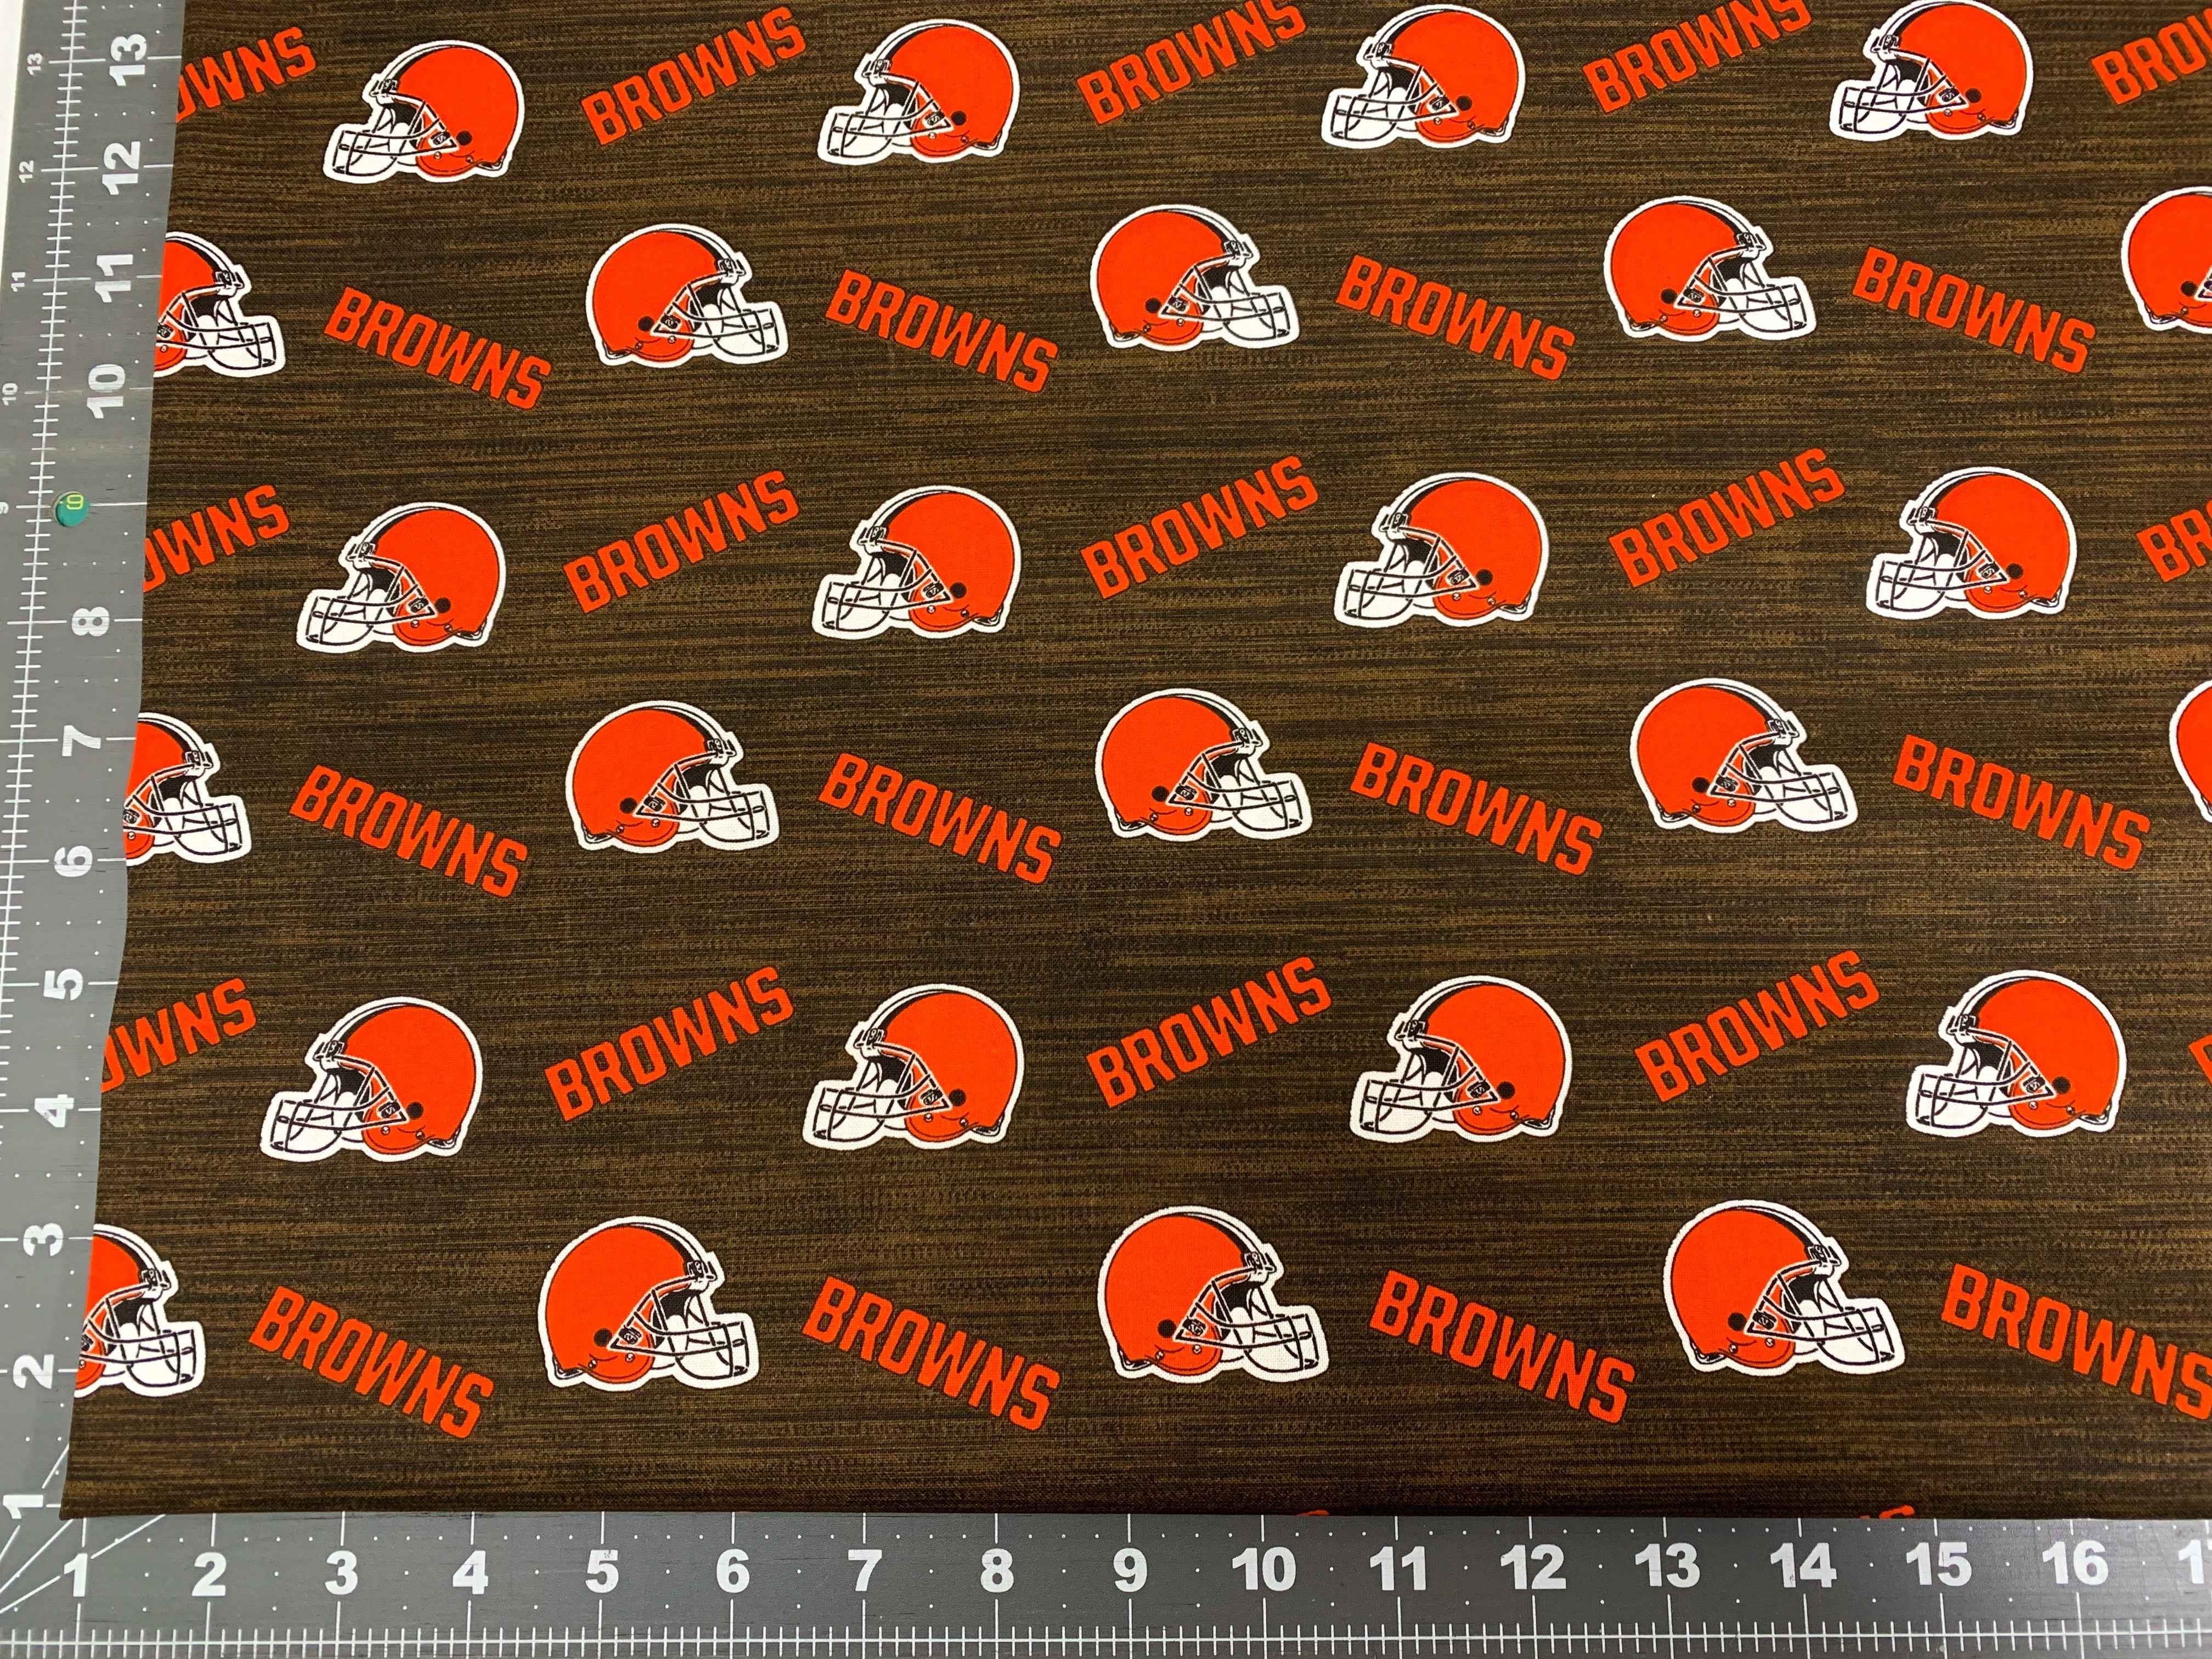 Cleveland Browns fabric 70494-D Browns cotton NFL fabric